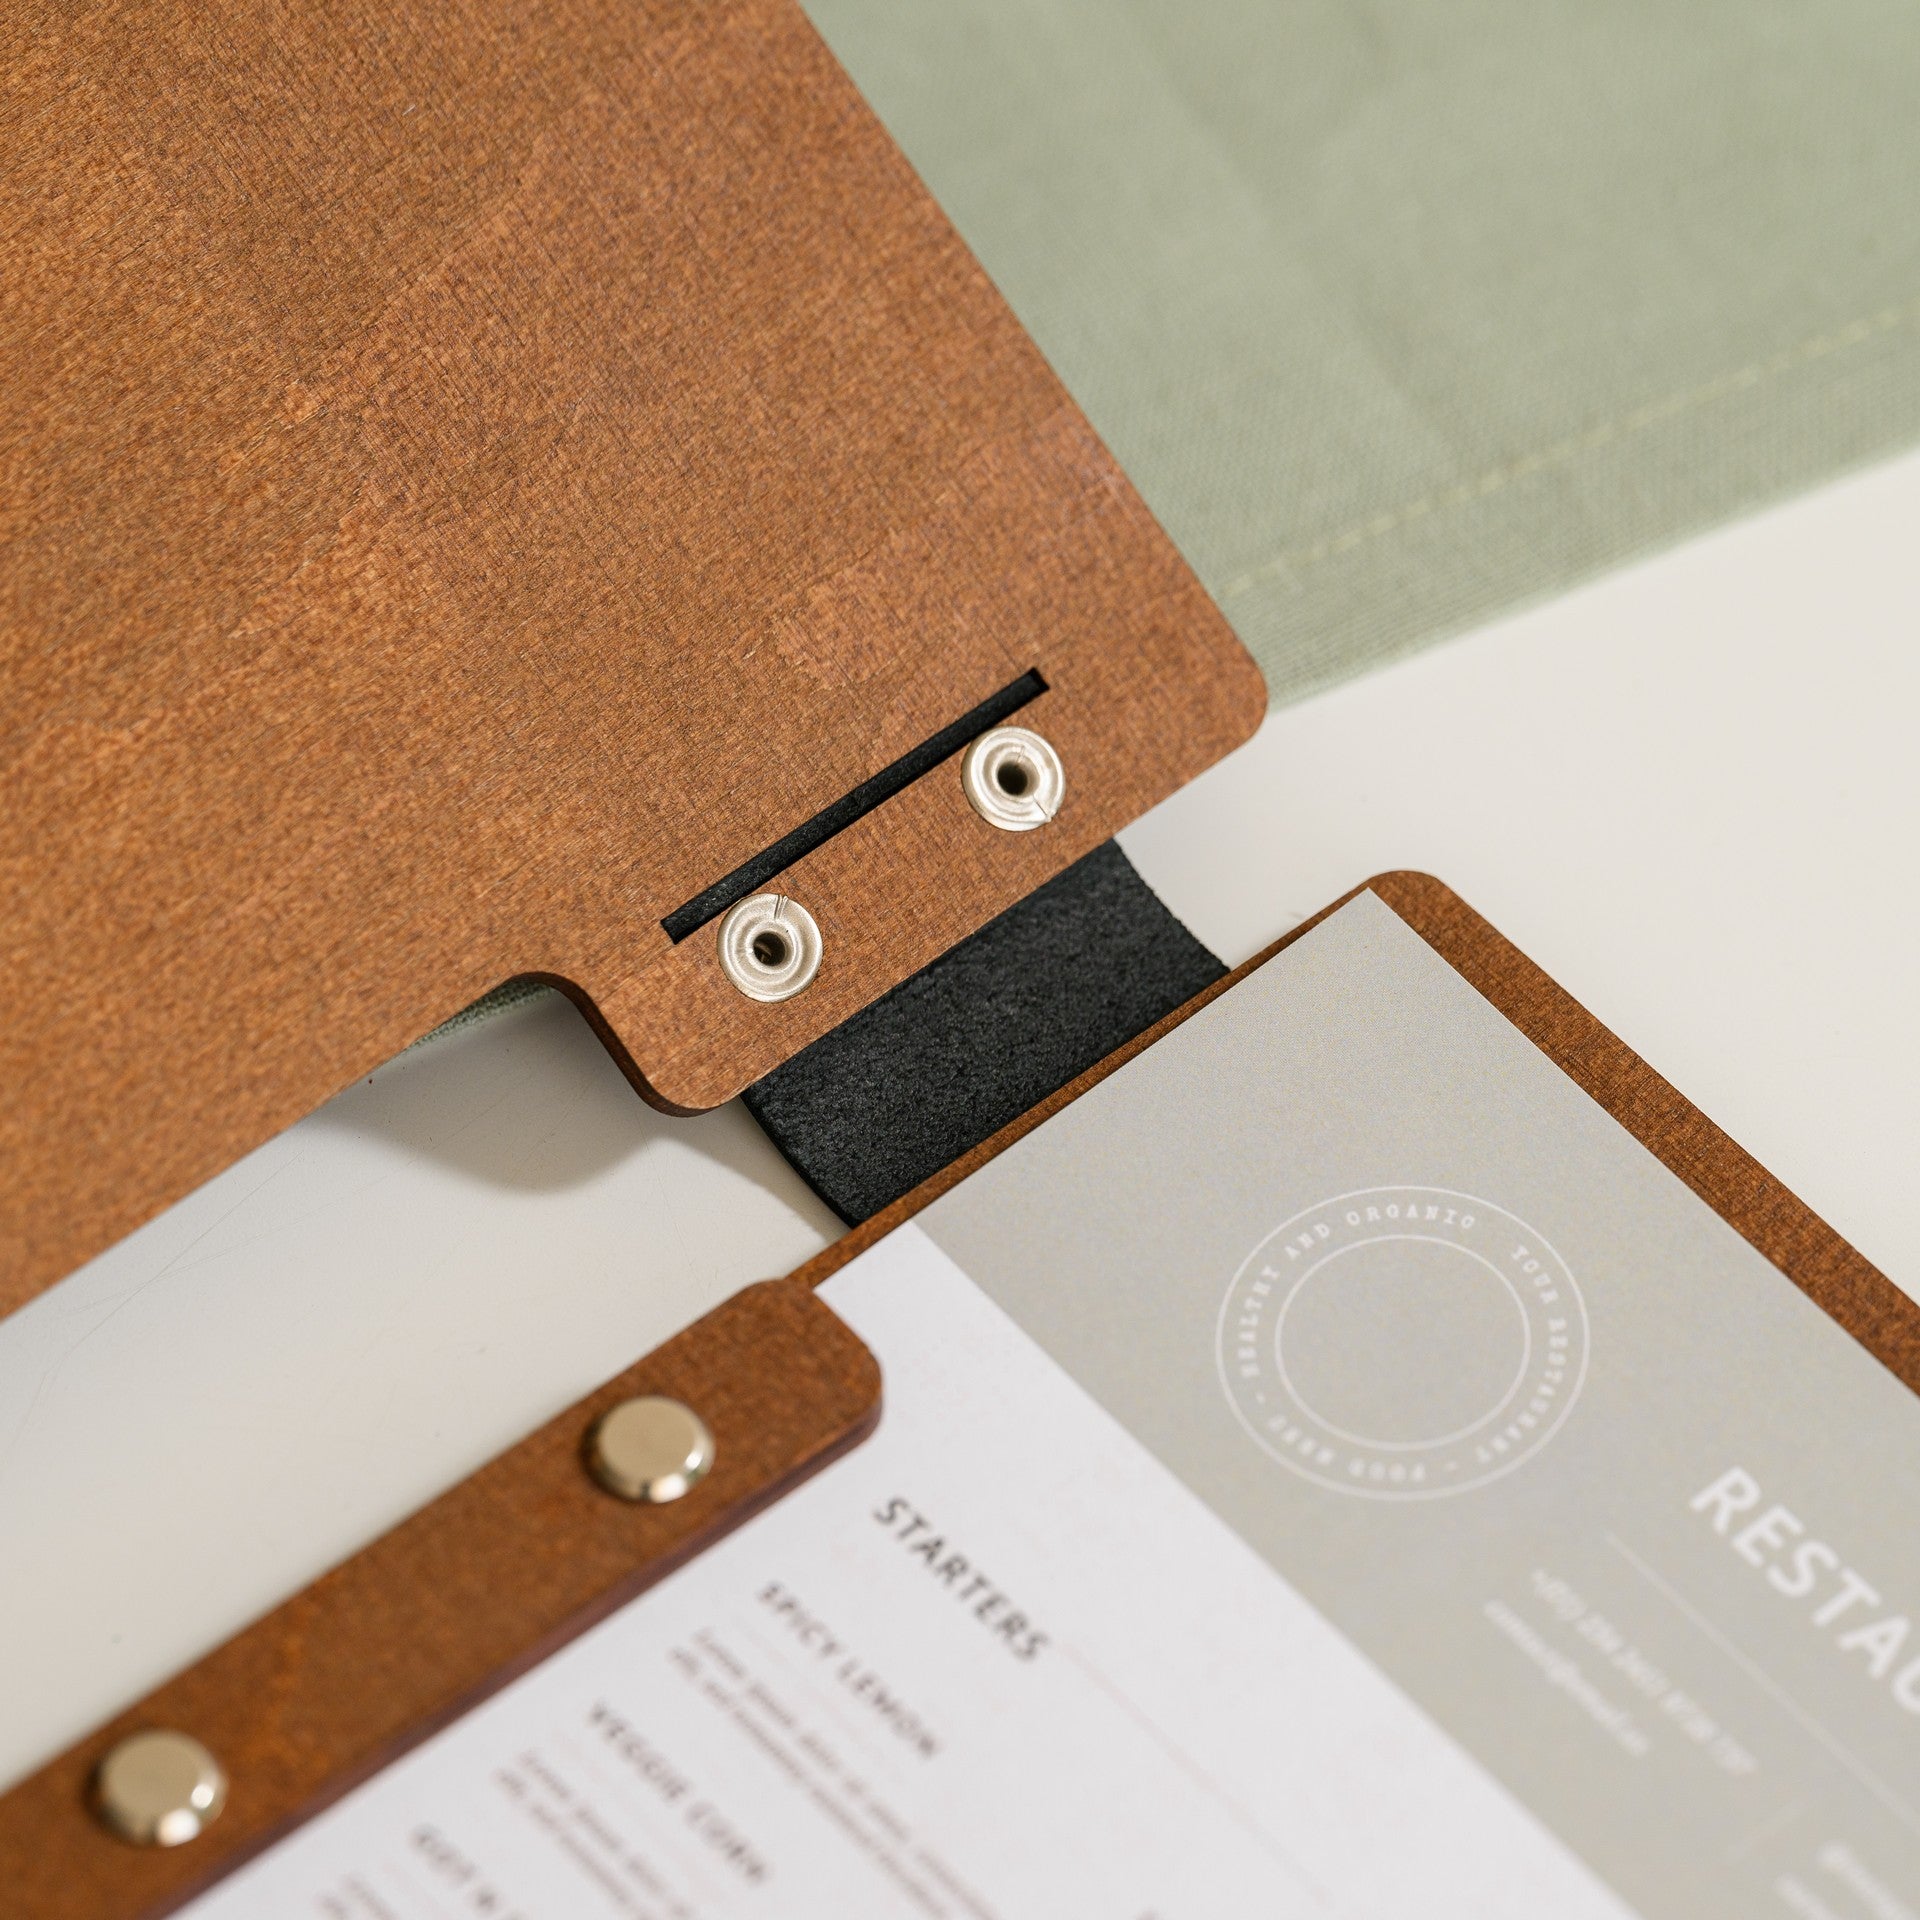 Wooden Menu Holder fastened with Plank Fixing suitable for Half Letter or A5 Sheets (M02A5)